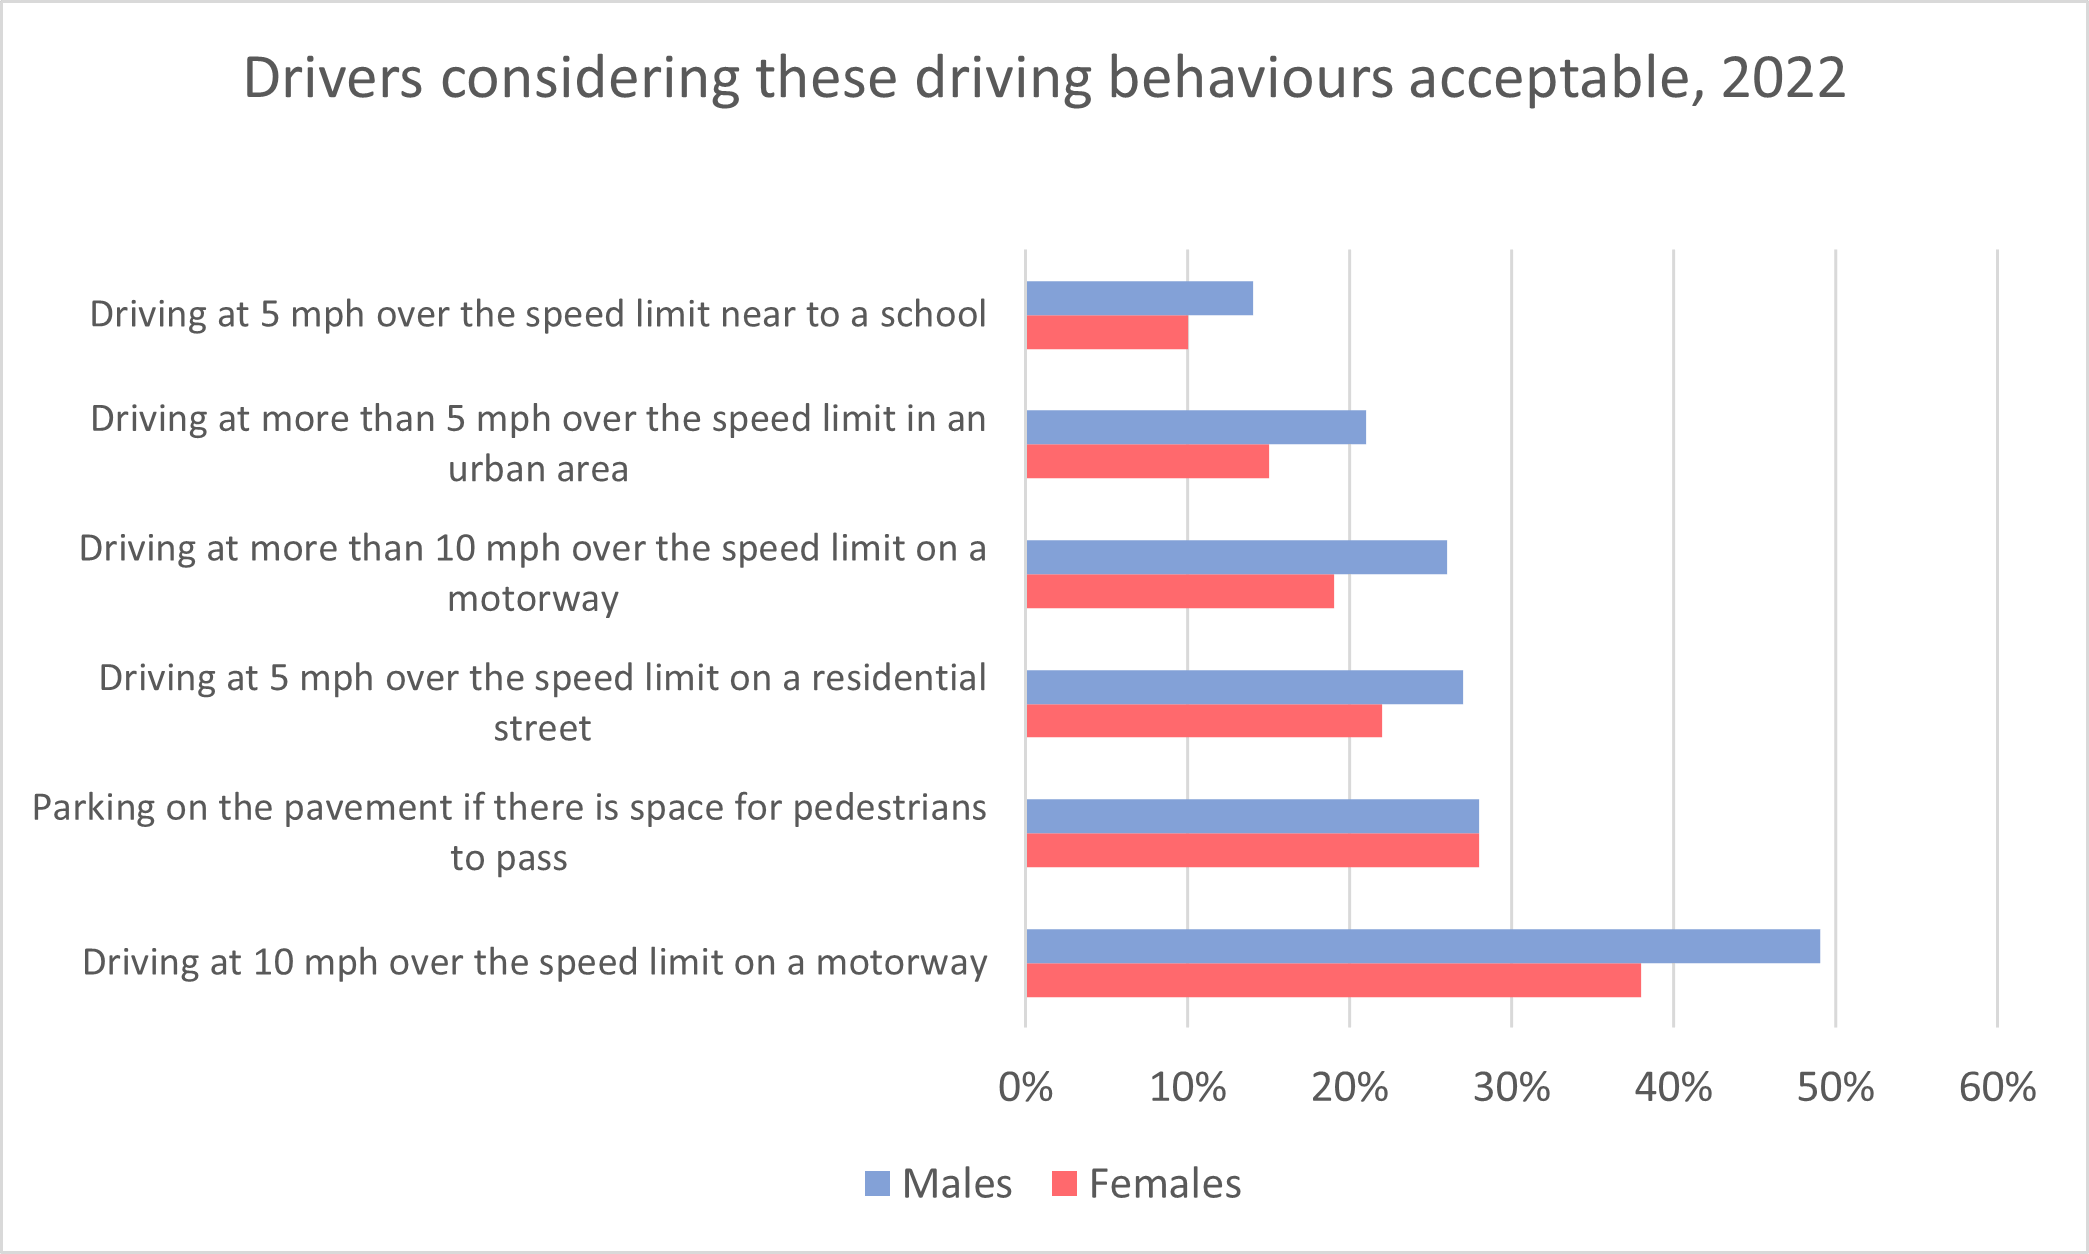 Drivers considering behaviors acceptable